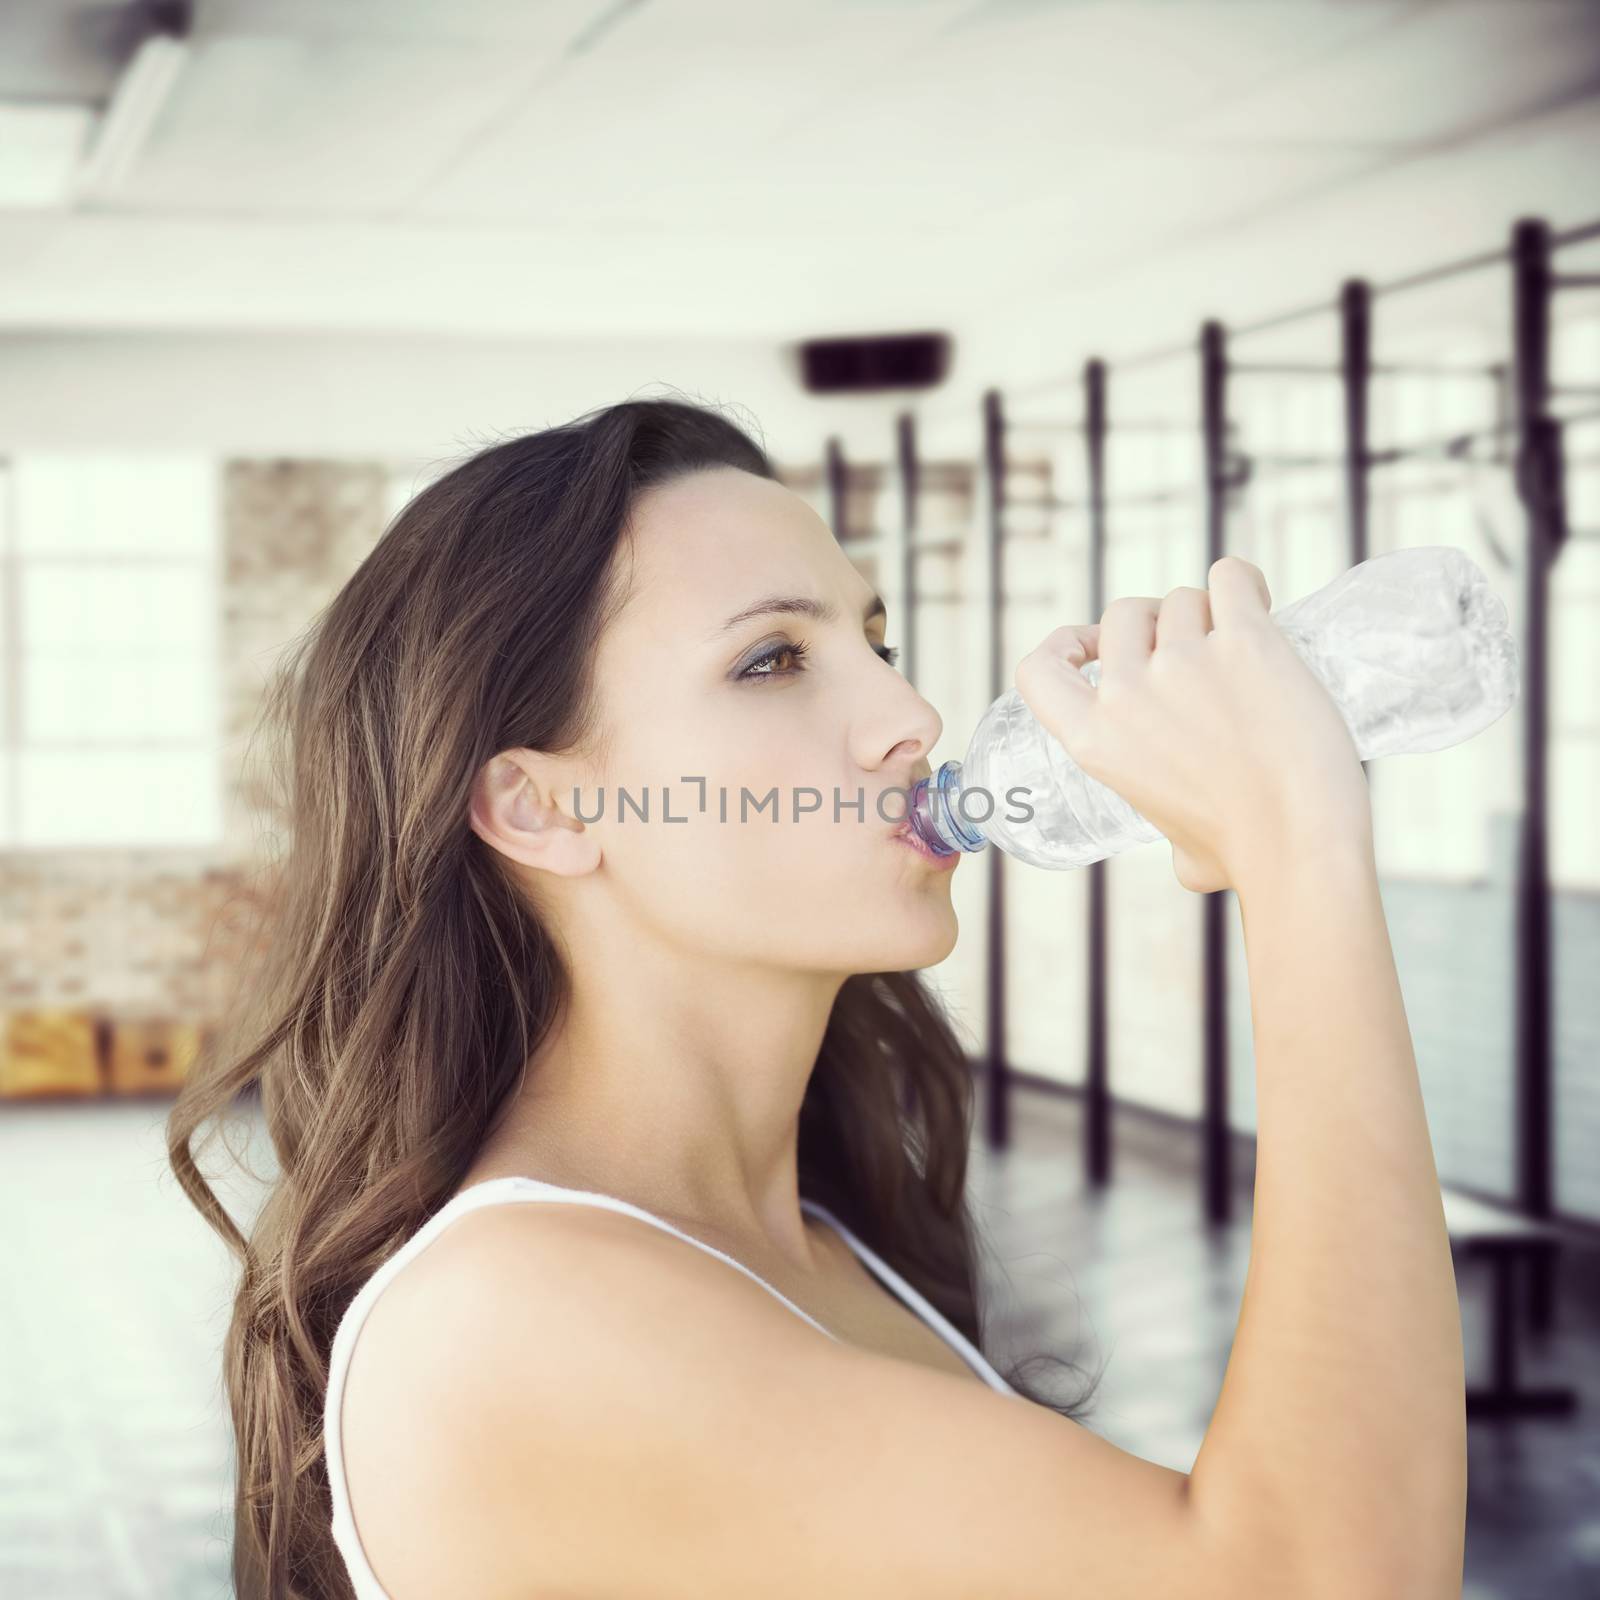 Beautiful woman drinking water from bottle against gym